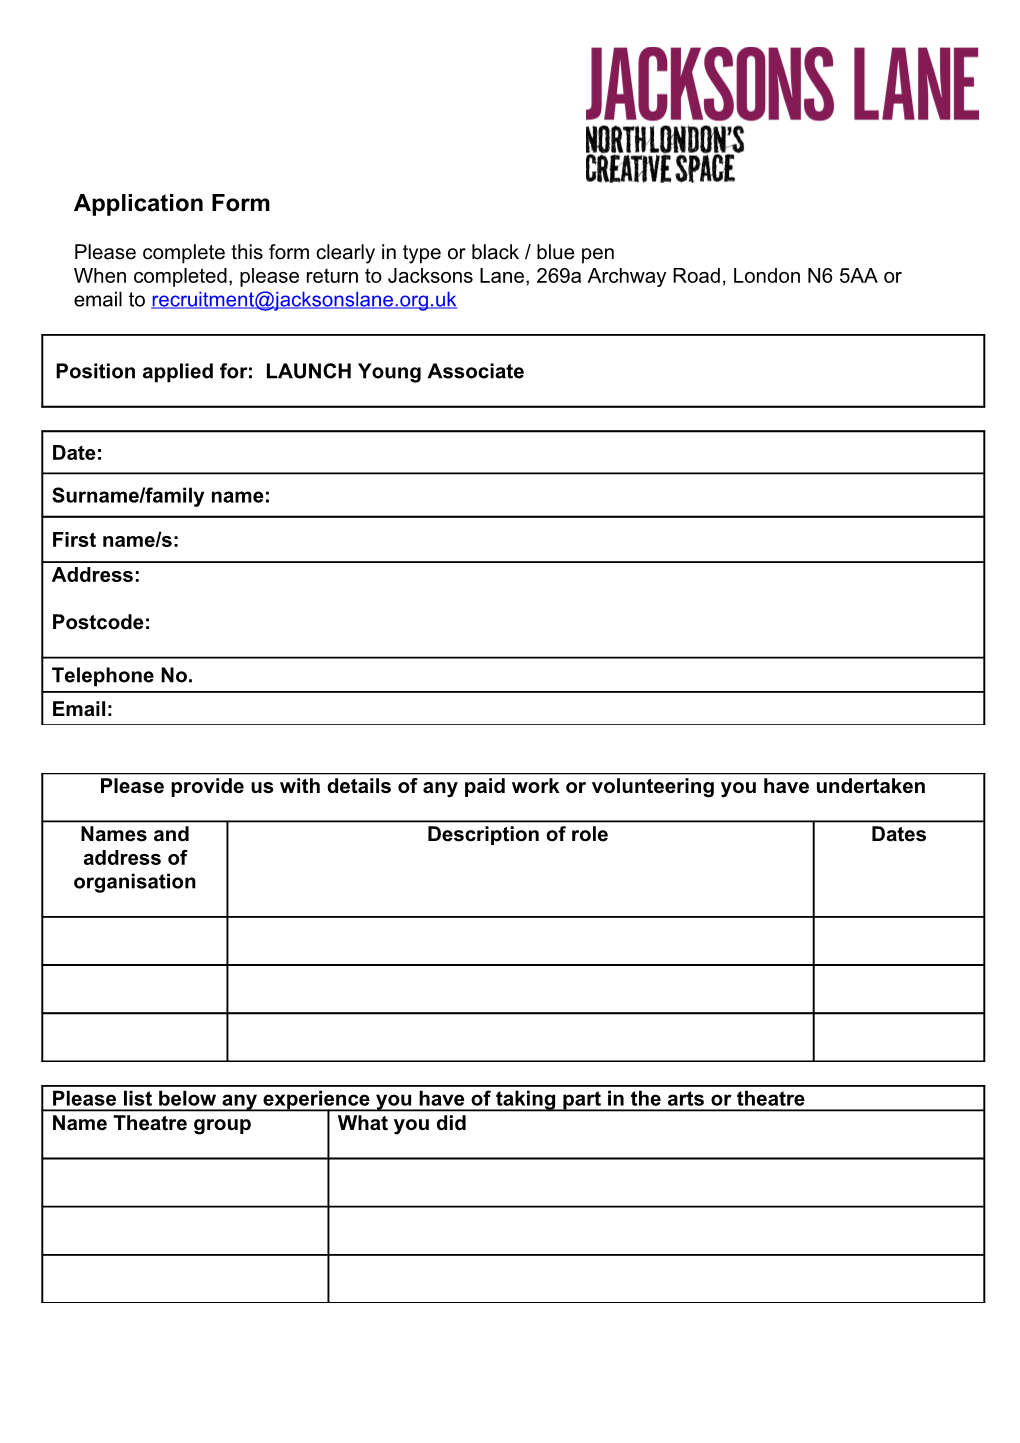 Applicant Information Form s1